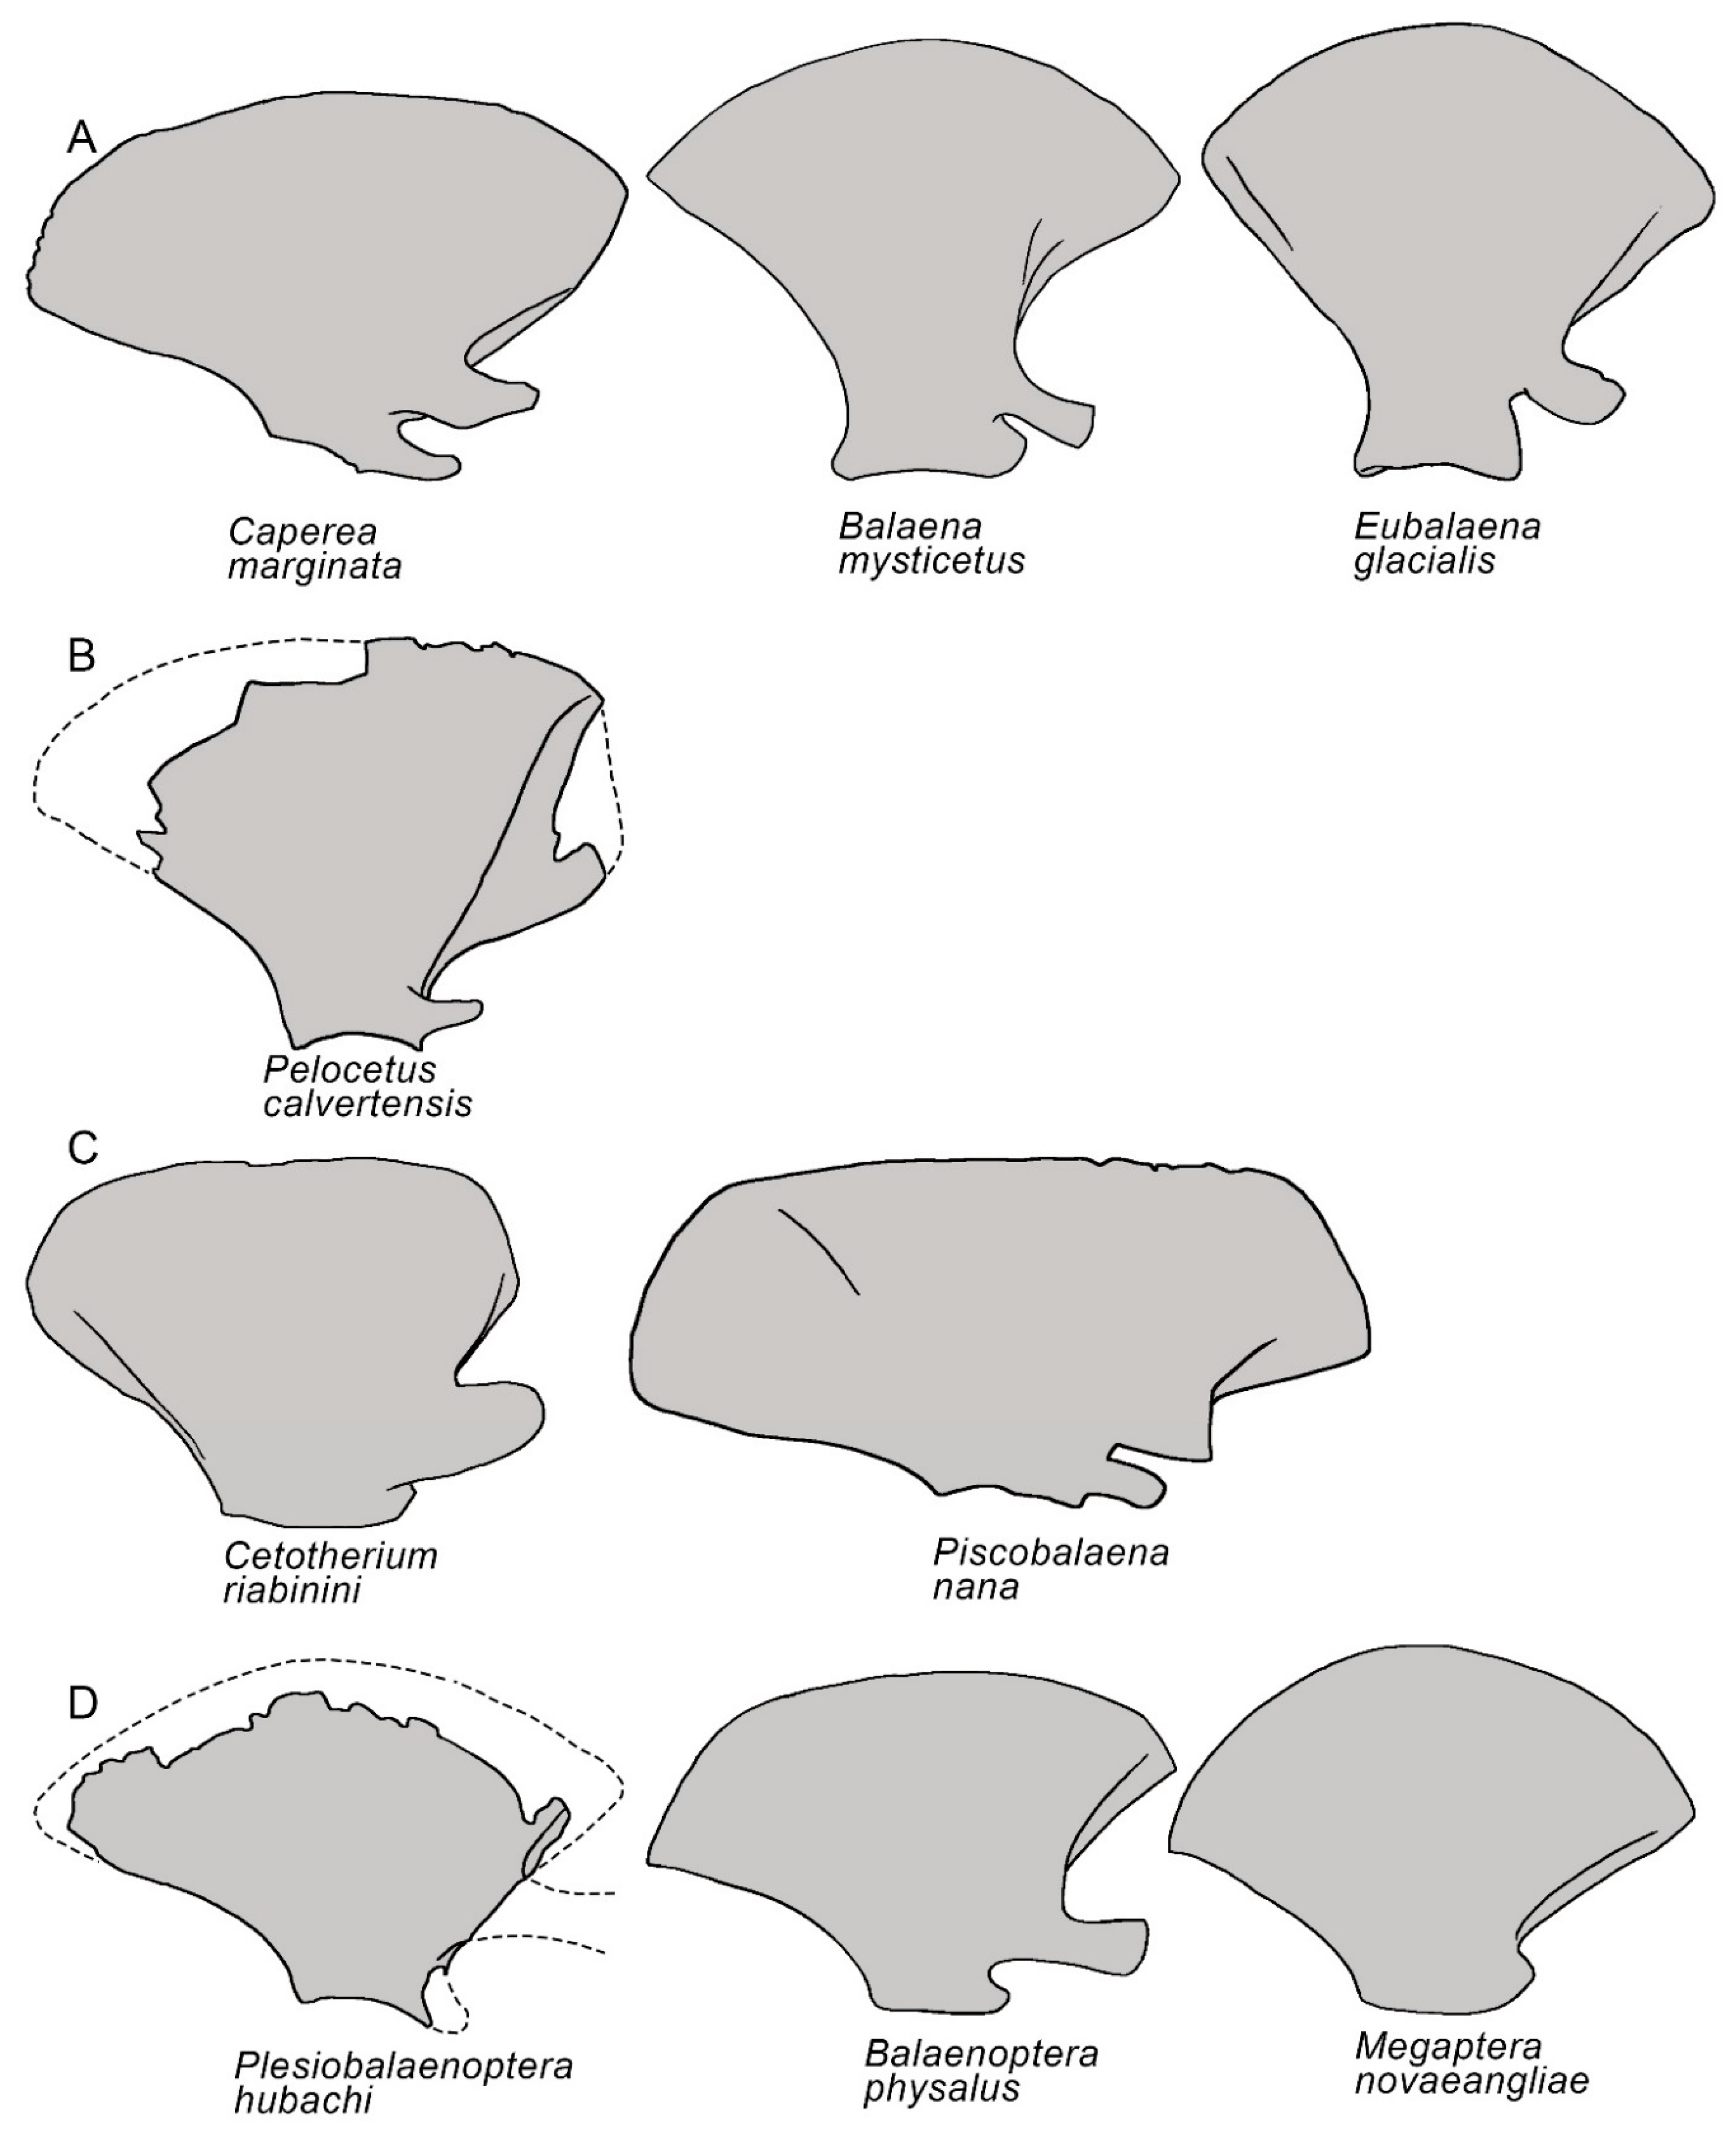 New specimens and species of the Oligocene toothed baleen whale